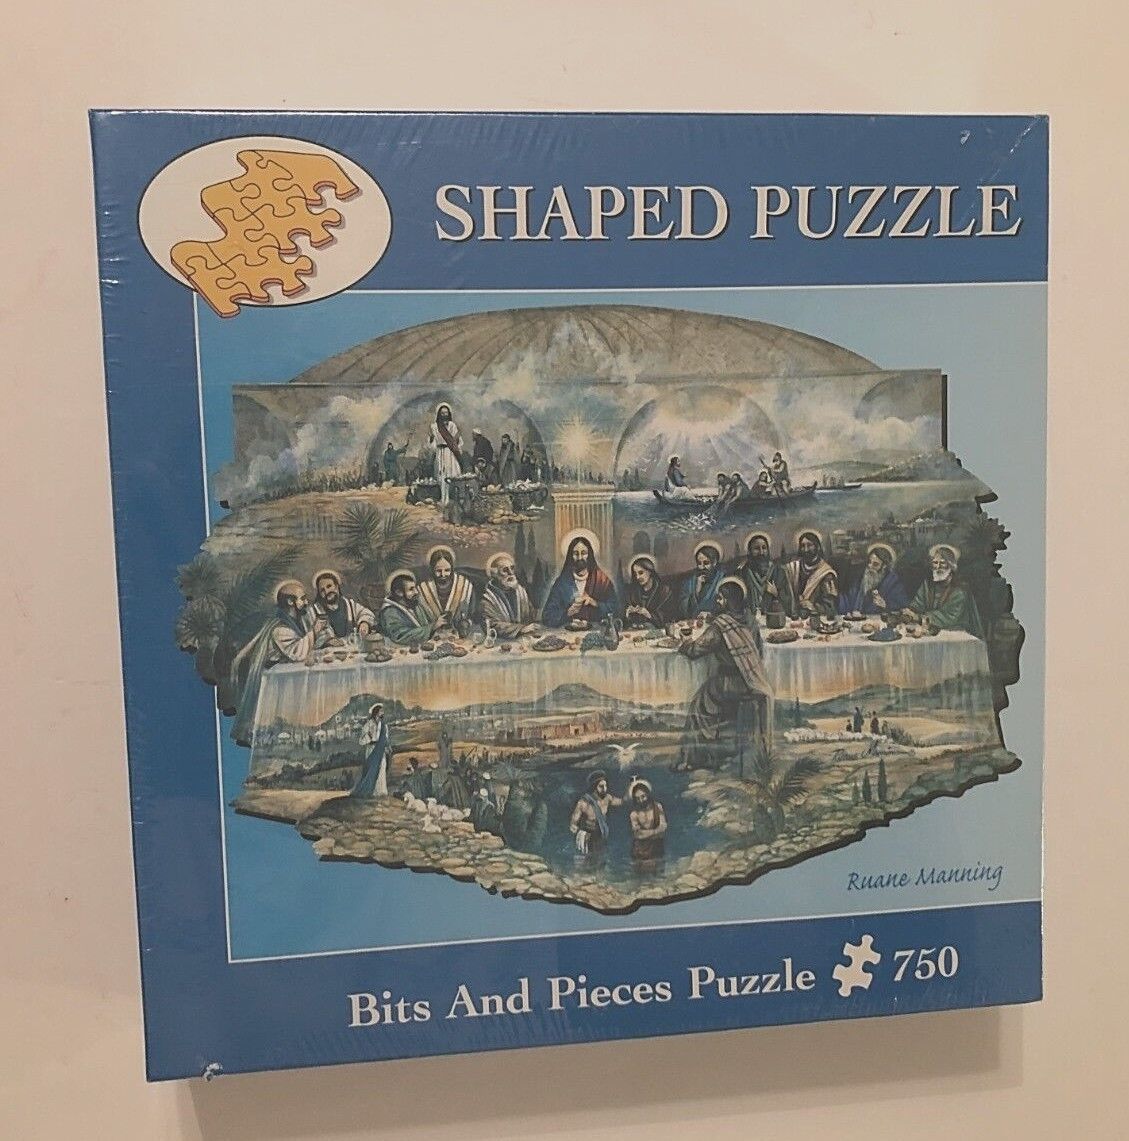 LAST SUPPER Bits and Pieces 750 Jigsaw Puzzle 2004 Ruane Manning 18-0043 New - $18.07